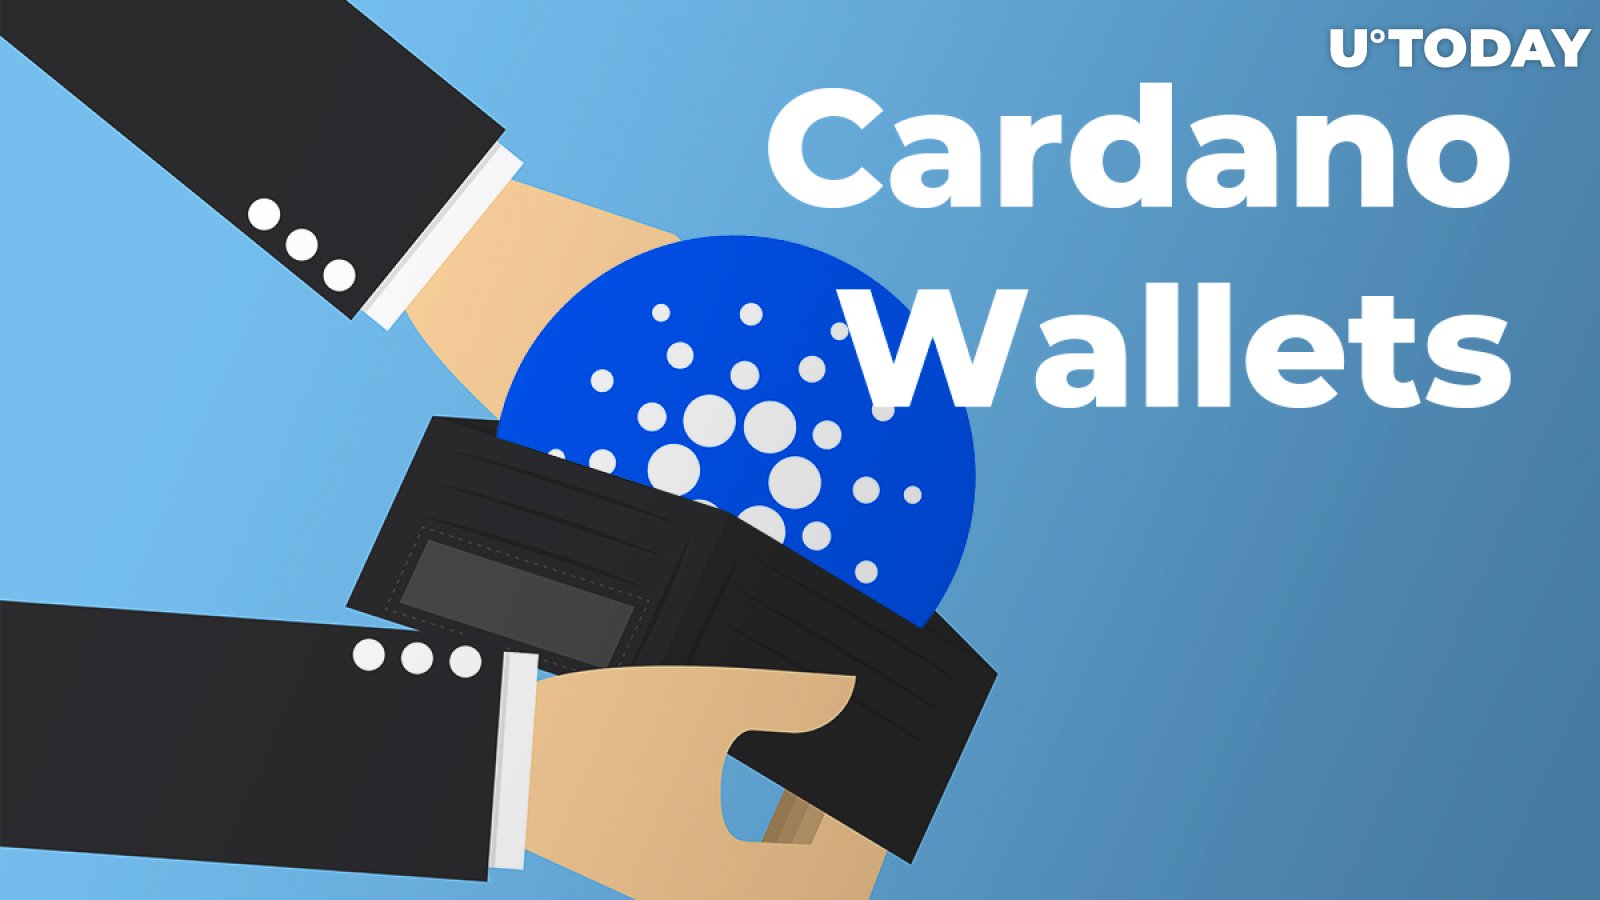 The Best Cardano Wallets 2019